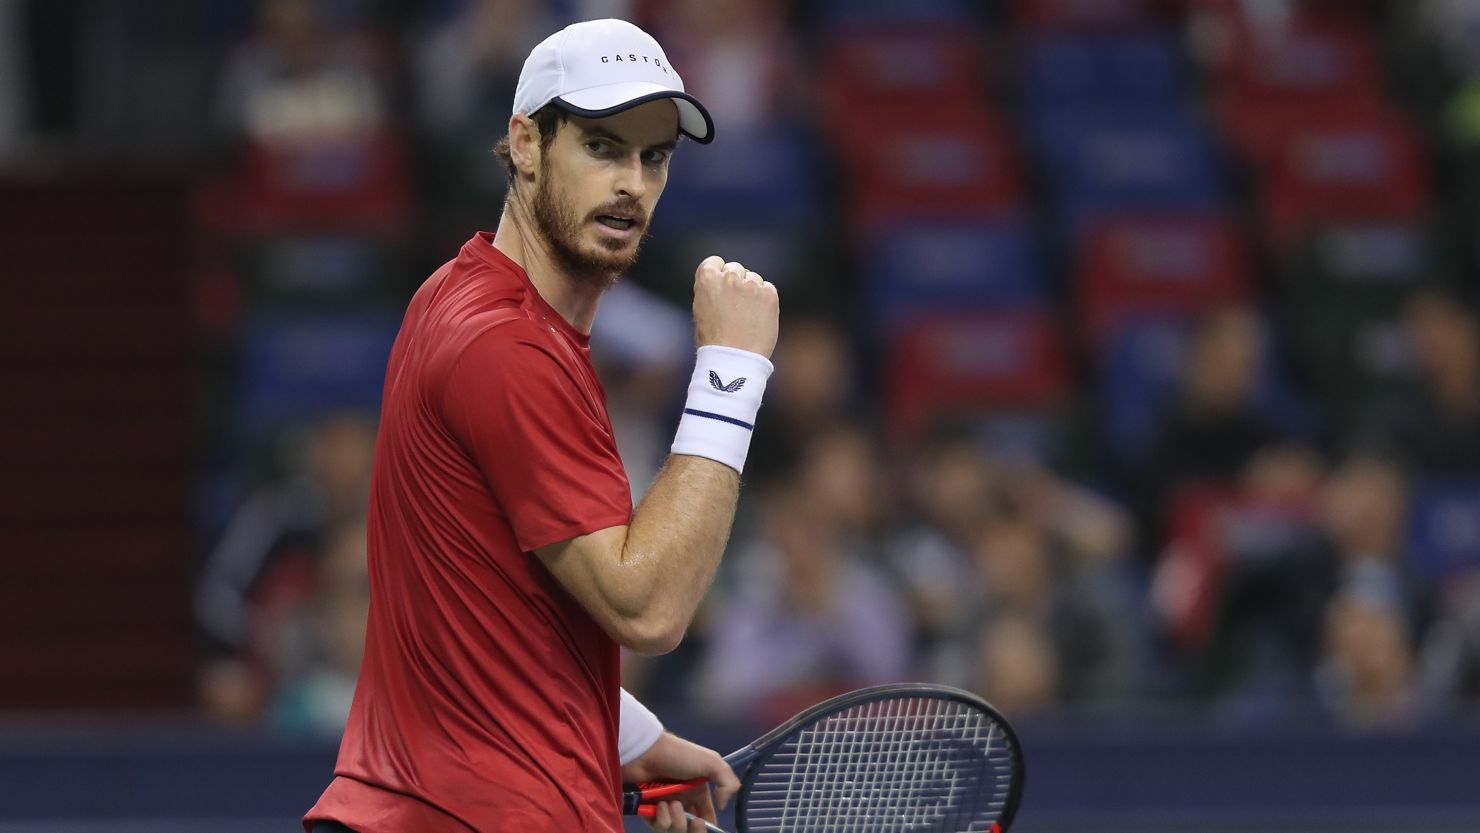 Andy Murray, once the top-ranked men's player in the world, has been ranked outside the top 200 in recent months.